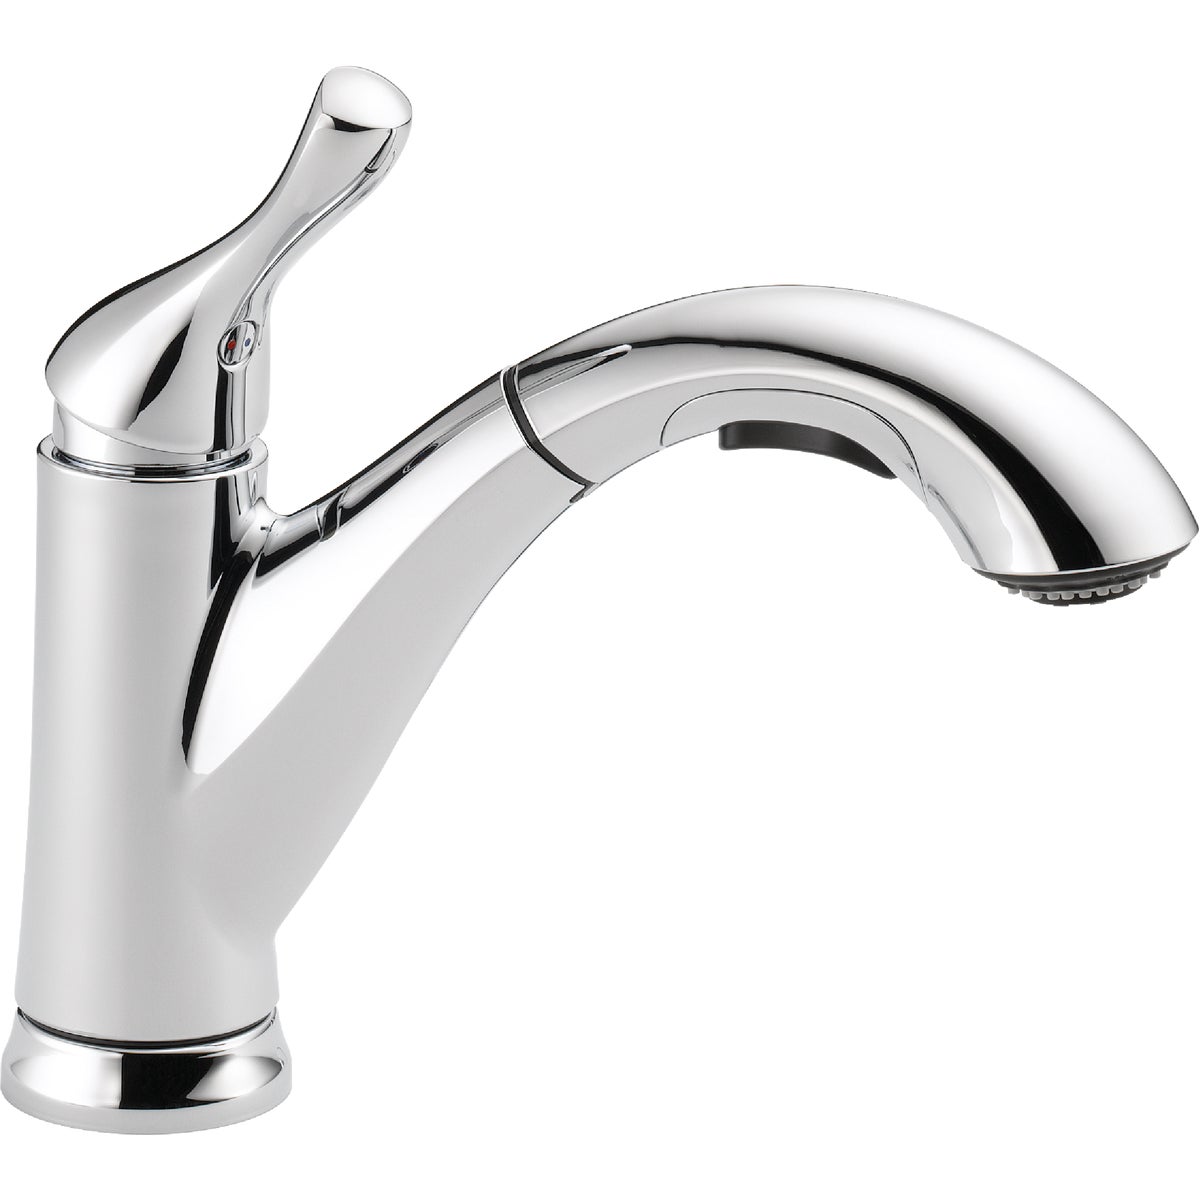 Delta Grant 1-Handle Lever Pull-Out Kitchen Faucet, Chrome